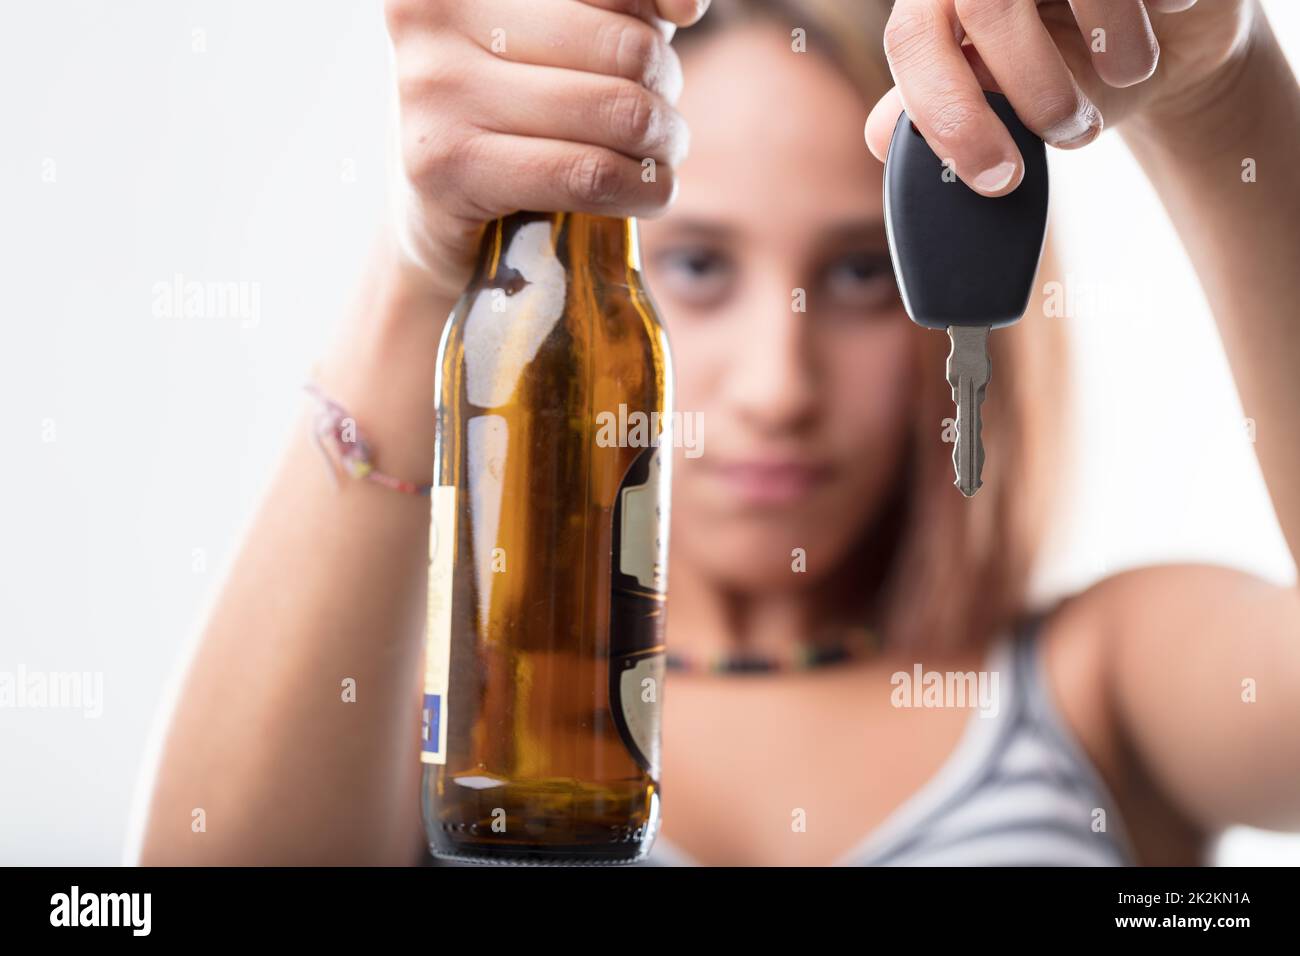 girl asking not to drink and drive Stock Photo